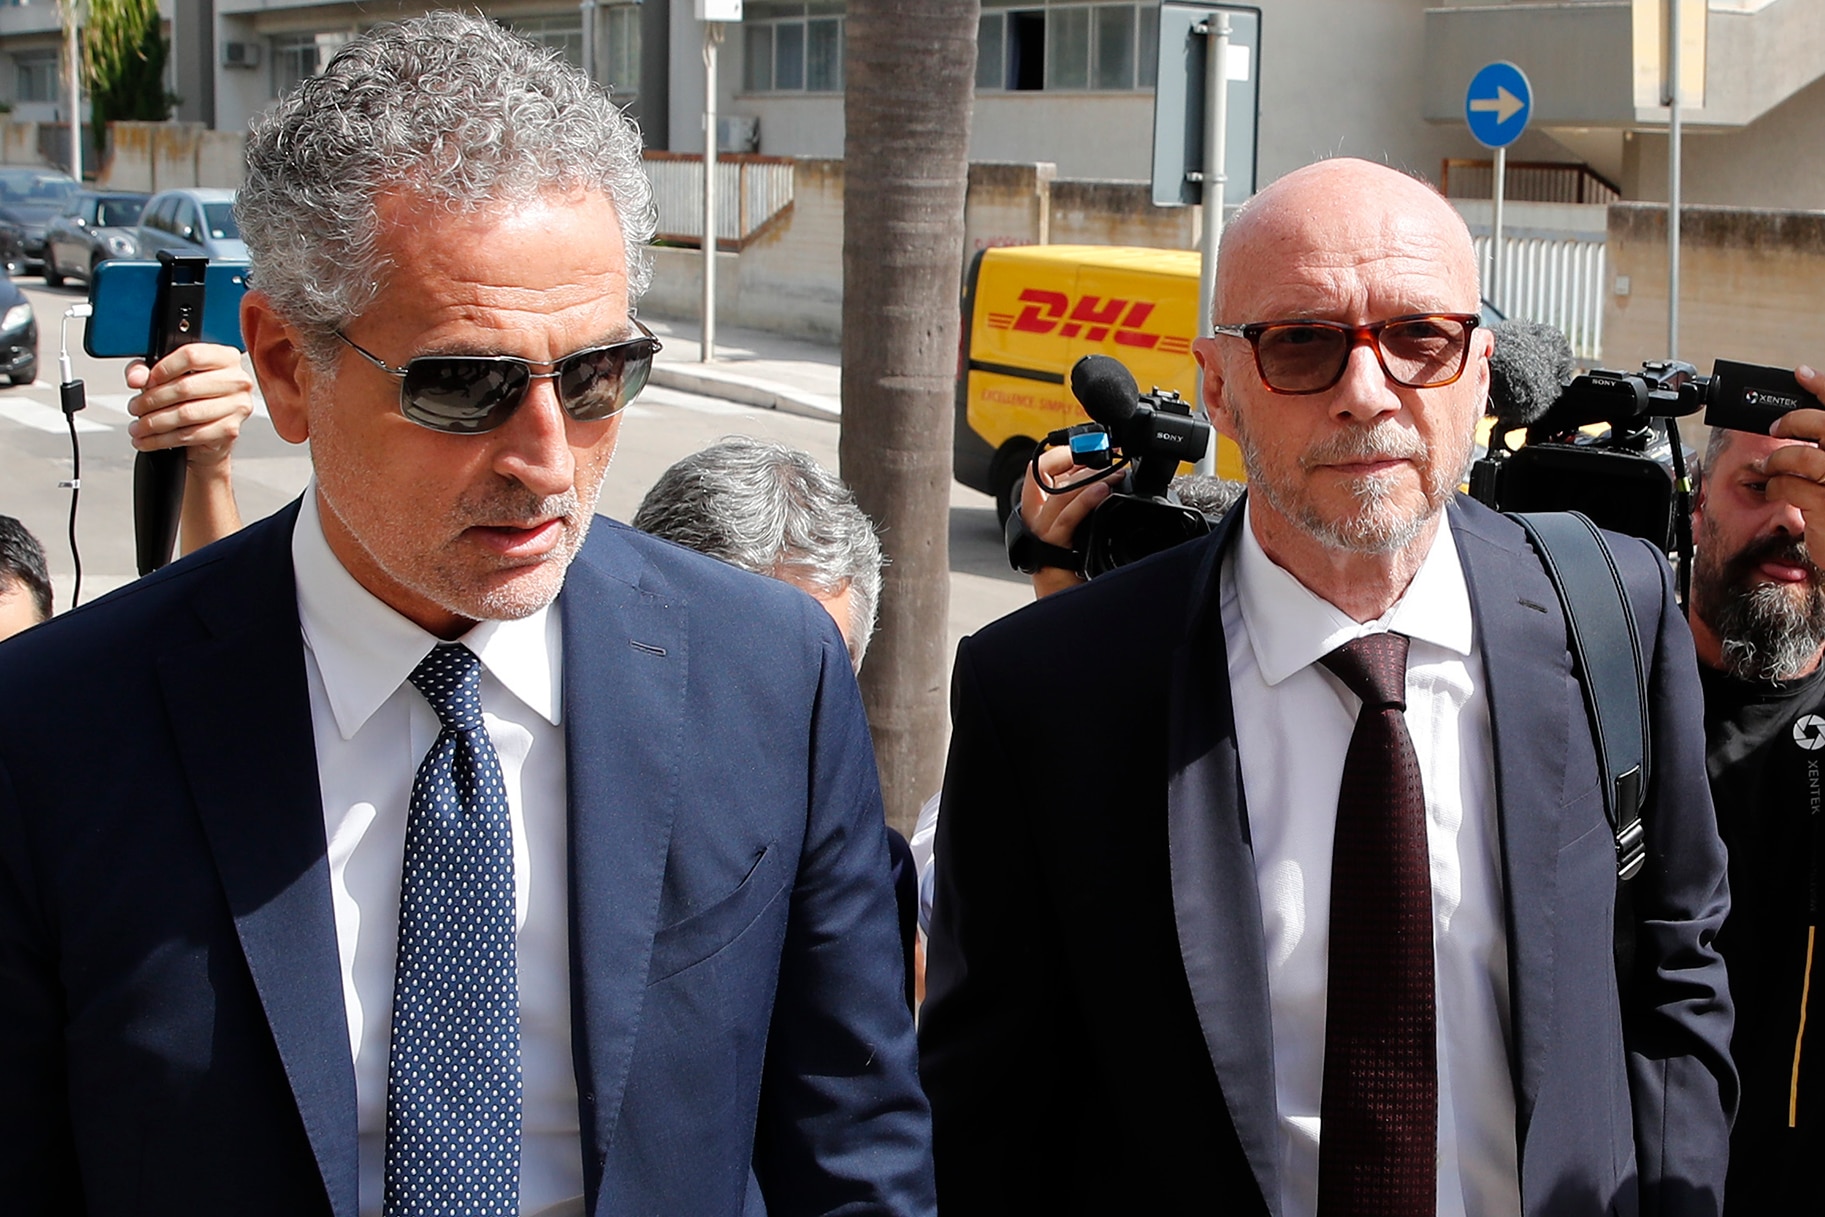 Paul Haggis arrives with his lawyer at Brindisi law court in southern Italy